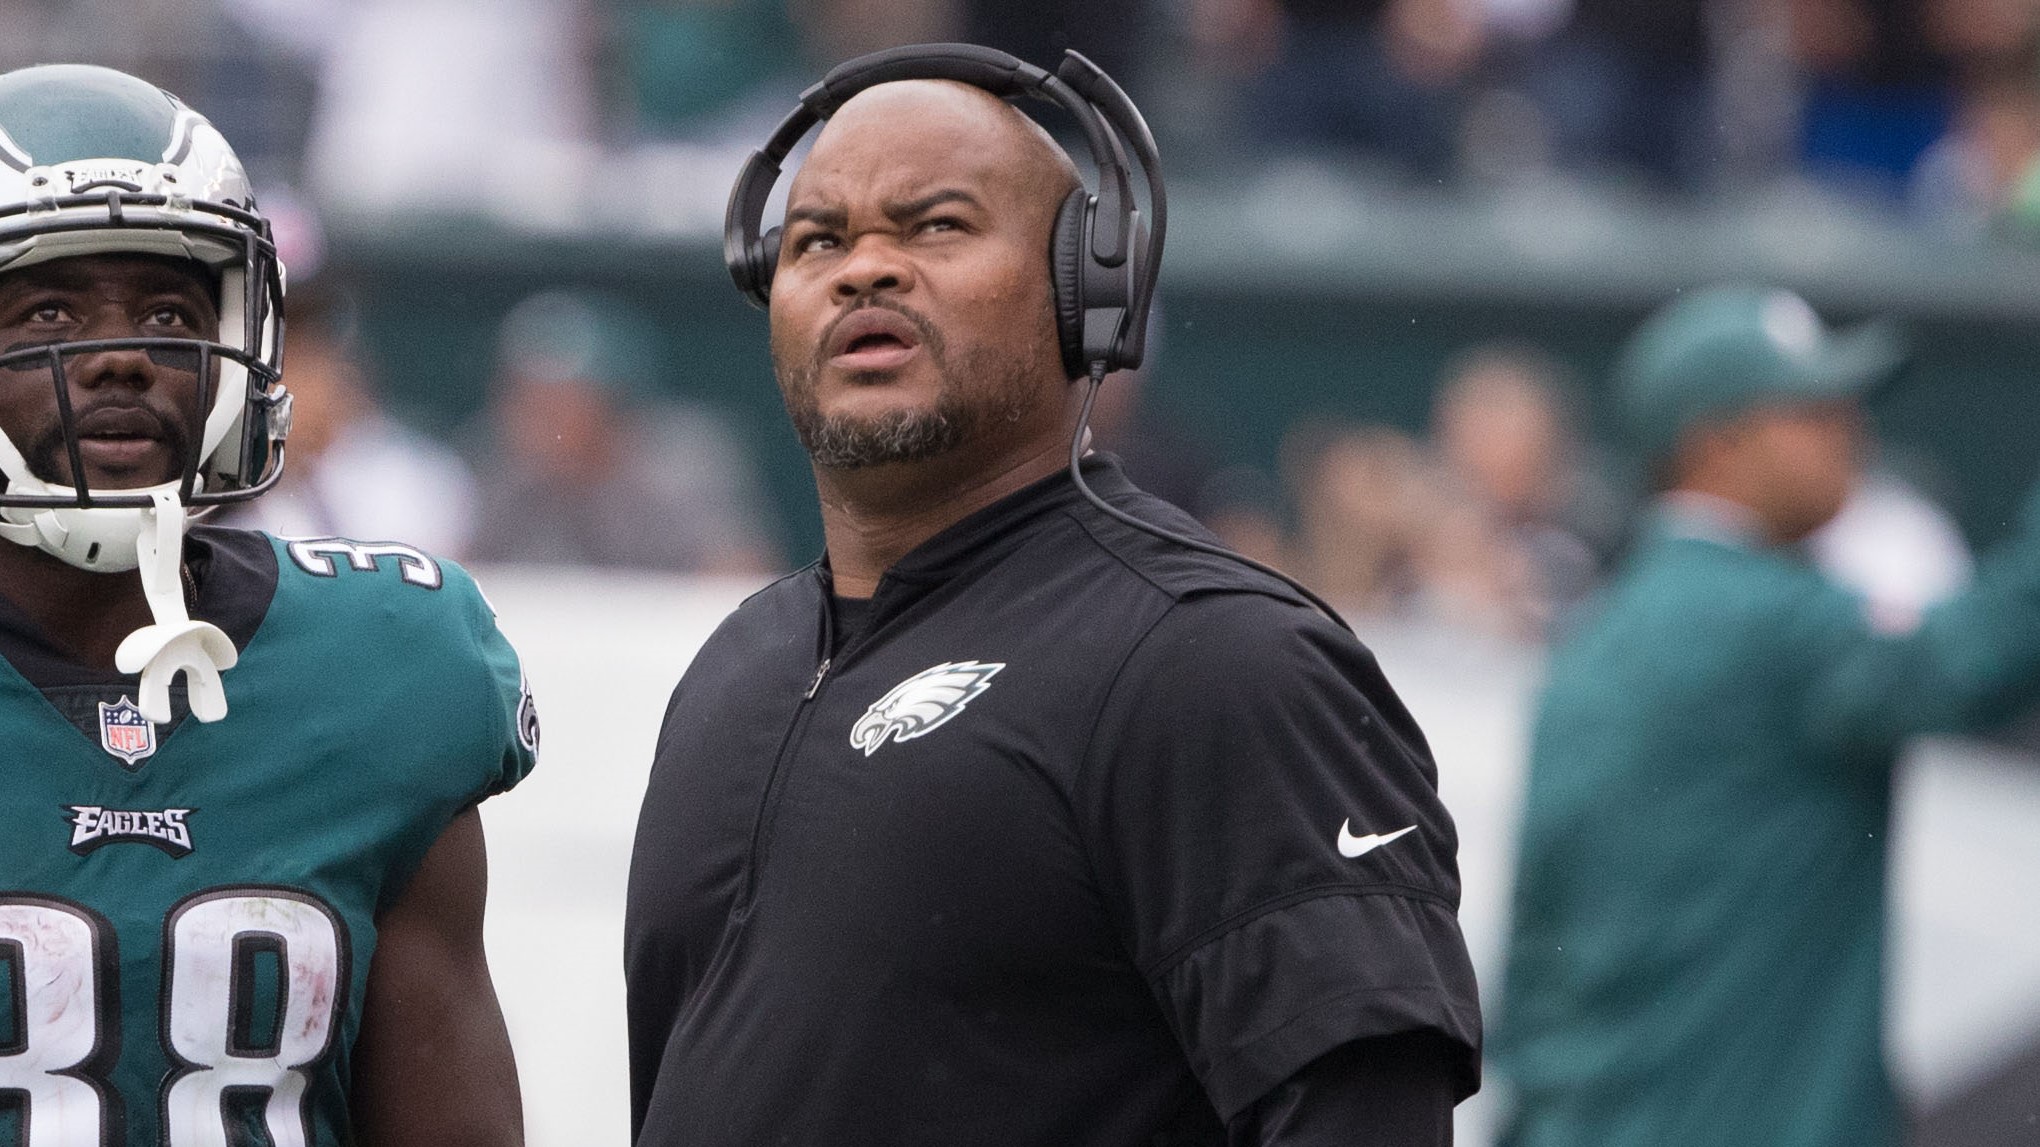 Duce Staley asks to leave the Eagles deal after being passed over for HC job